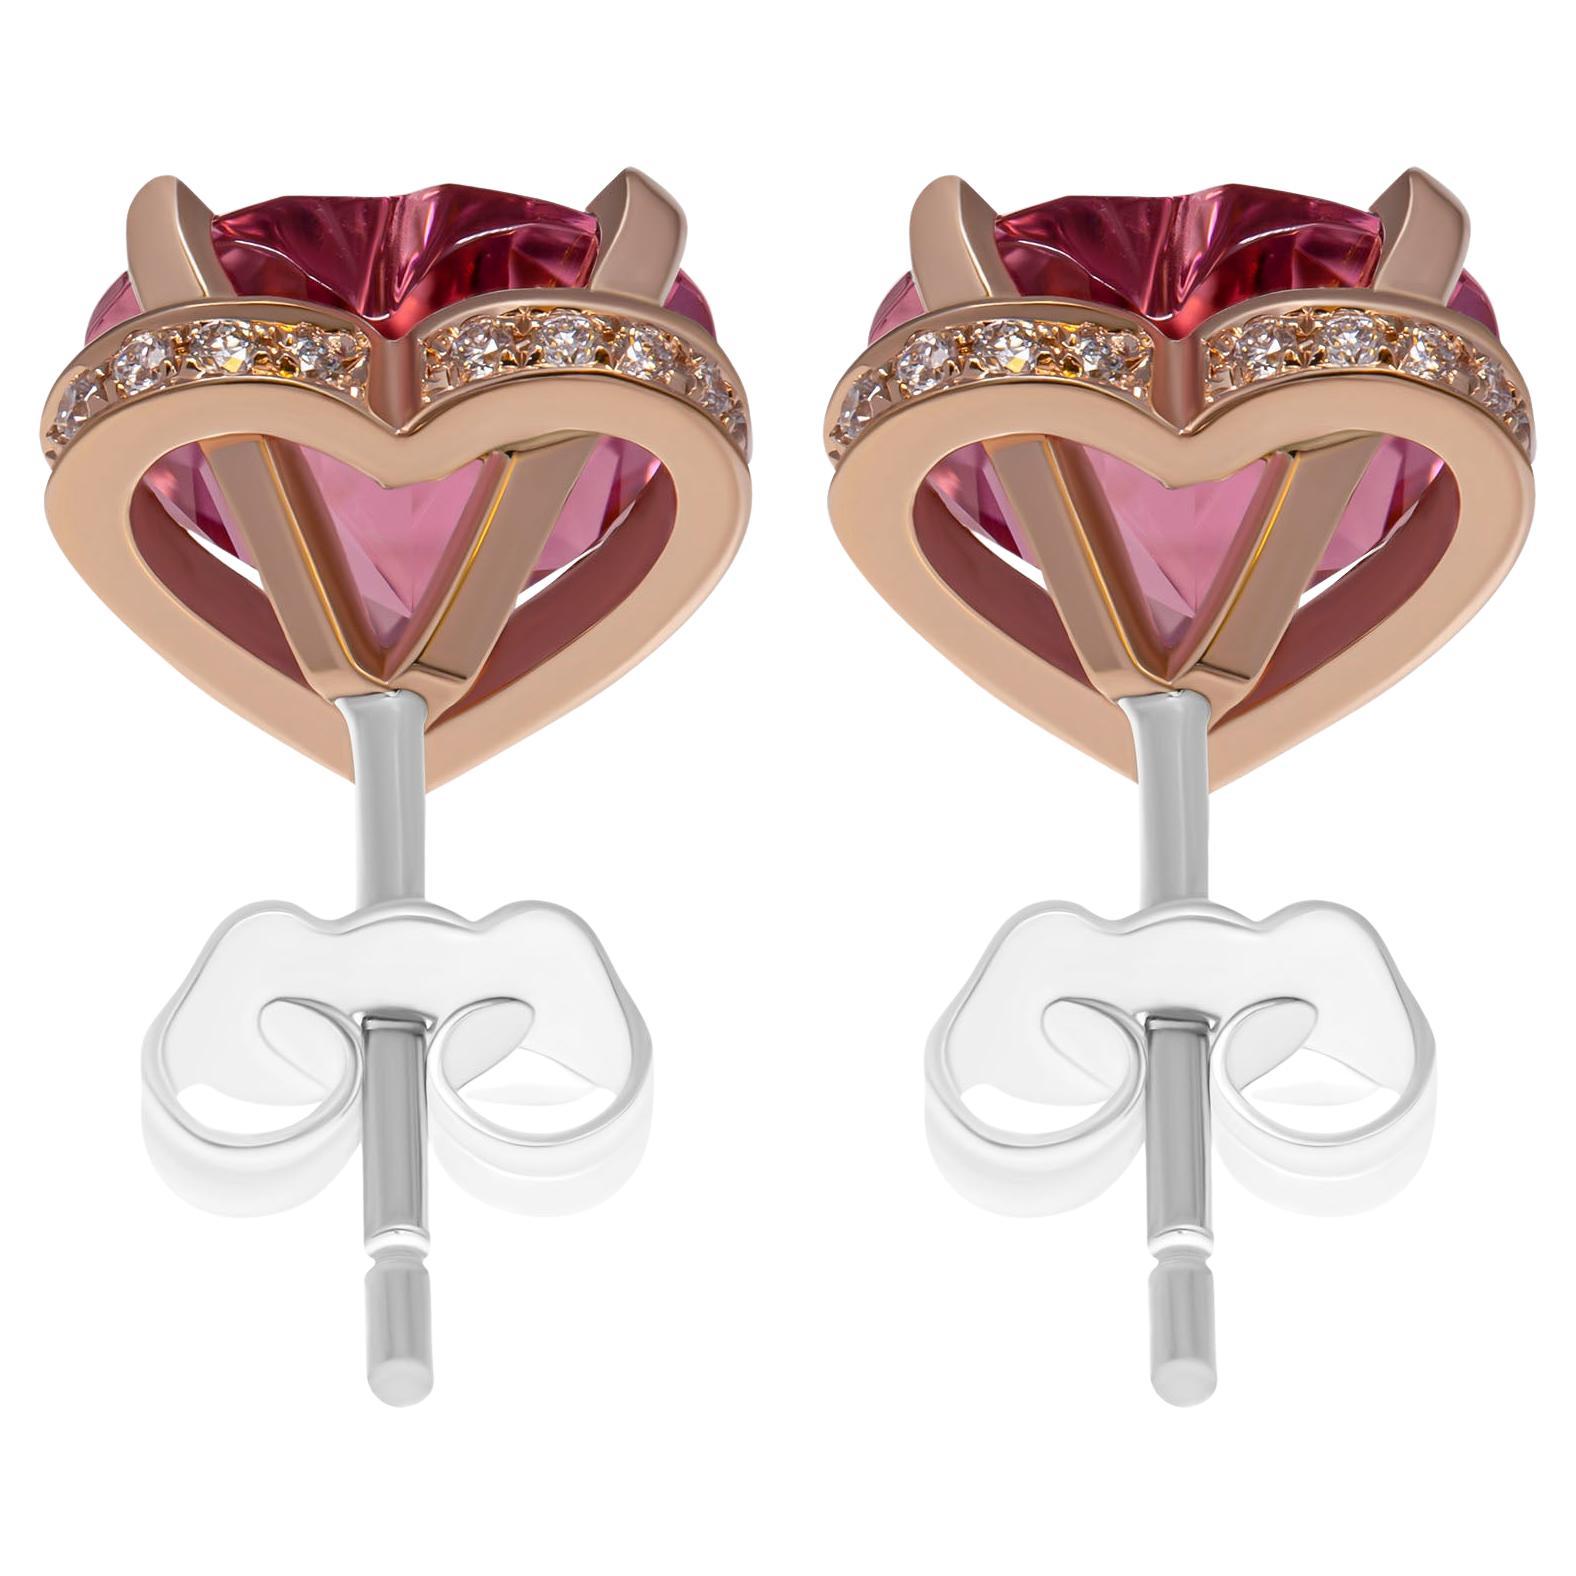  Earrings 14k Rose Gold
 Heart Shape Diamond Pink Tourmaline 3.87ct
 Total Carat Weight of pave:0.11ct